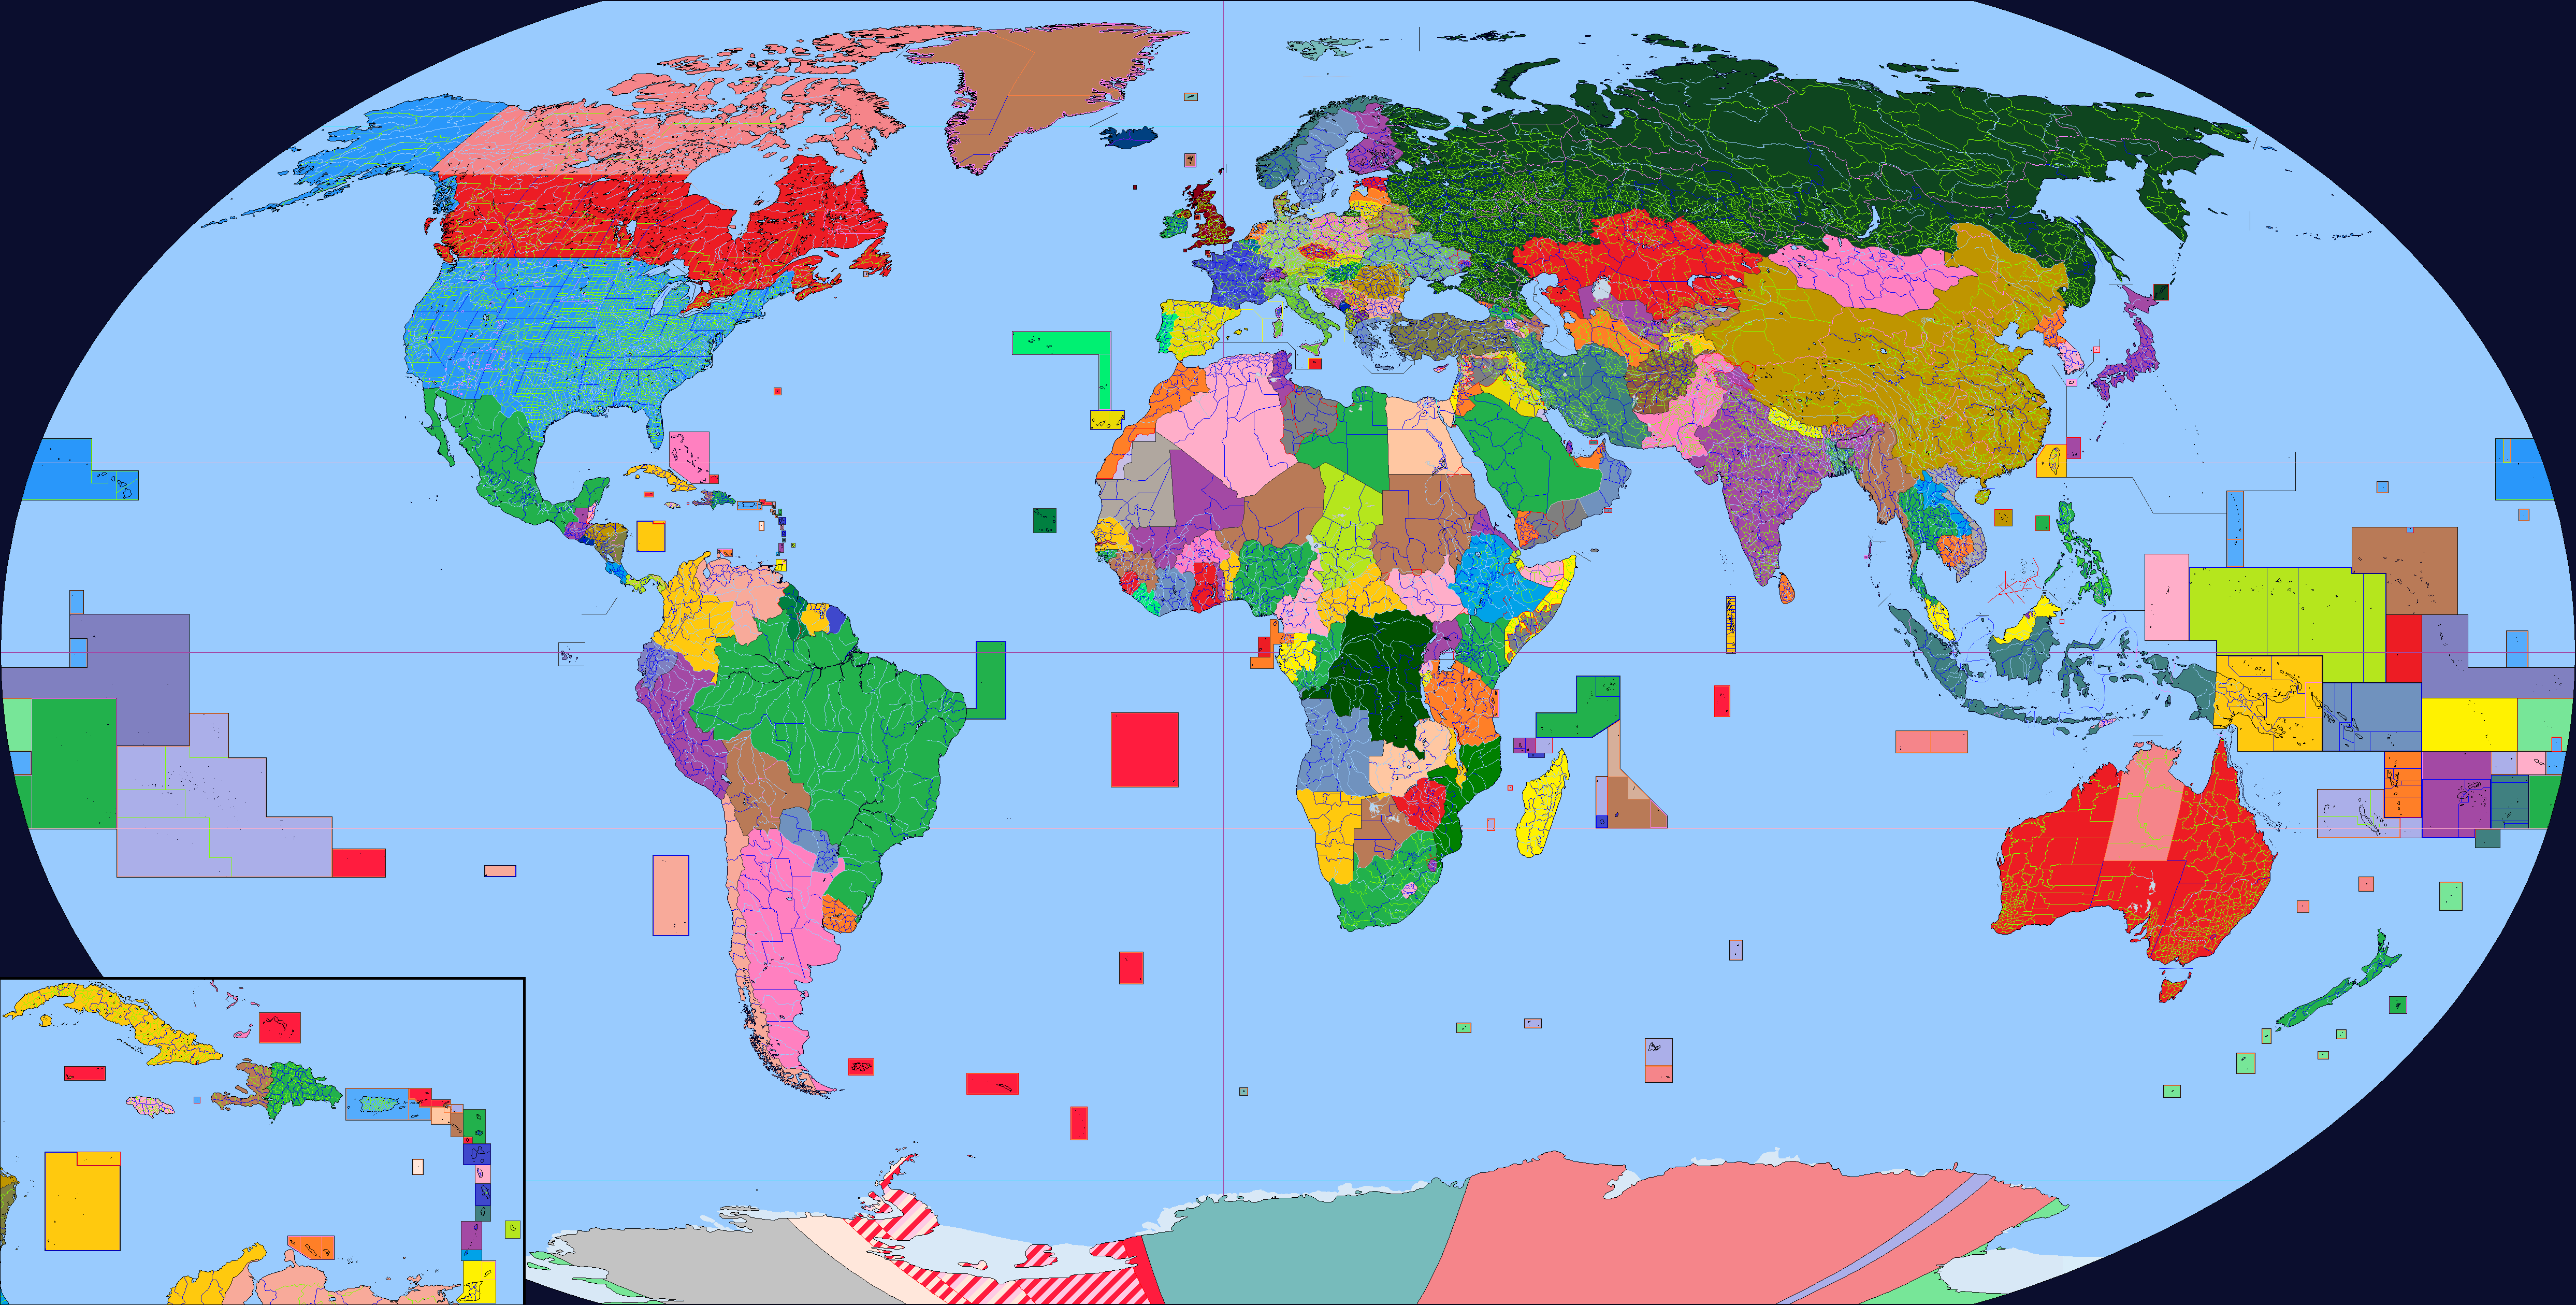 world map with provinces 1 image - Romanovs Return to Russia mod for Hearts...